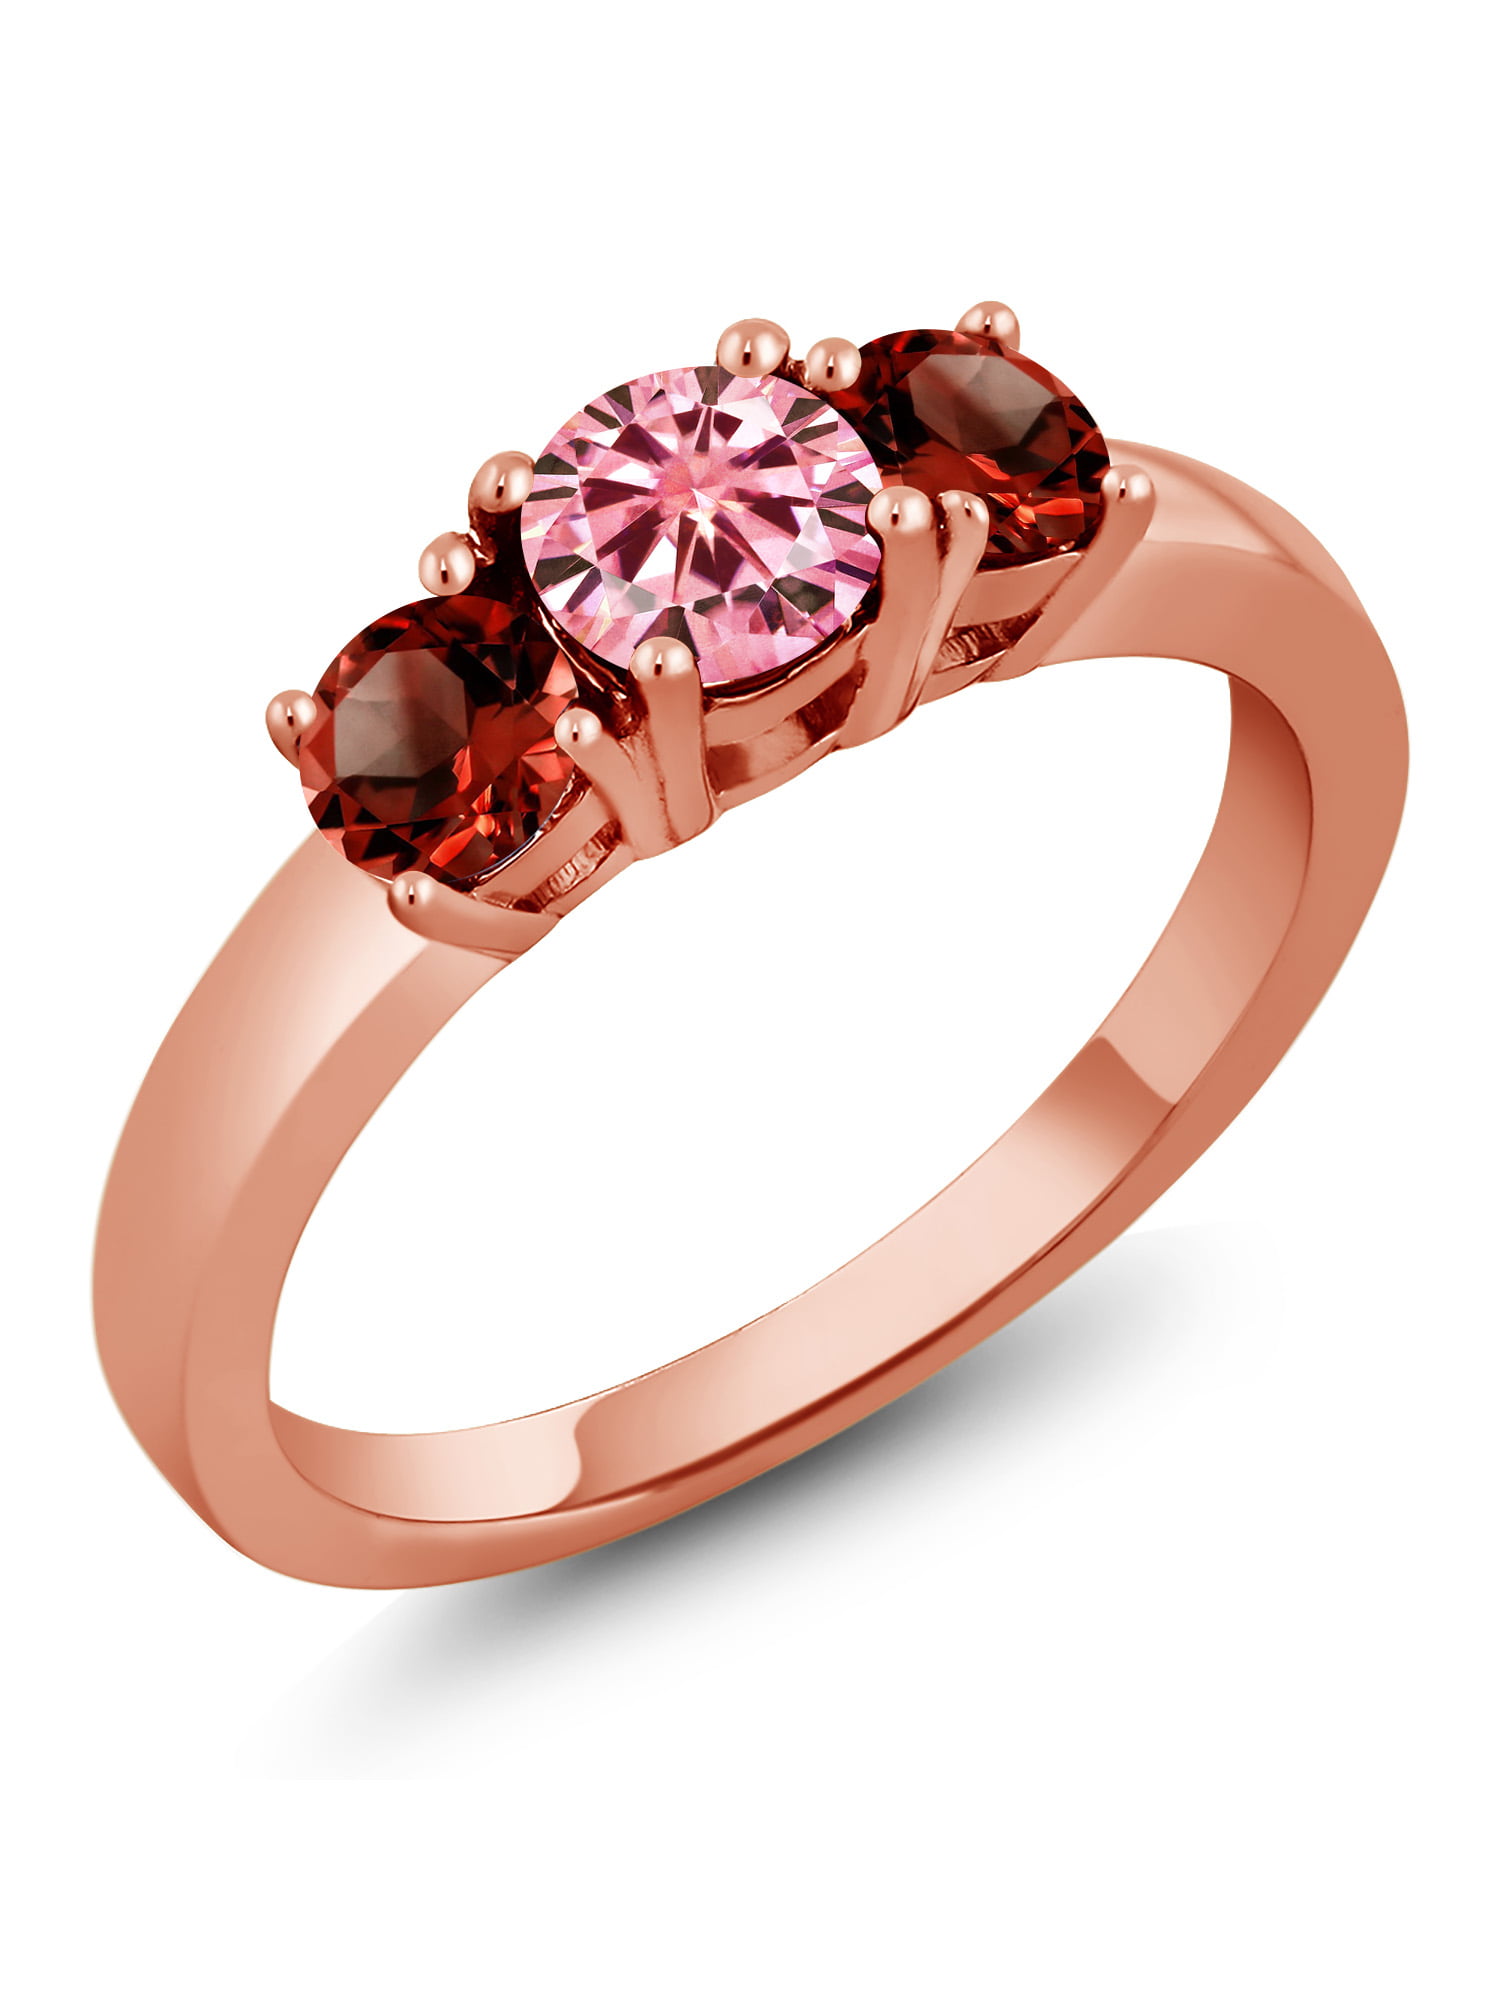 Gem Stone King 18K Rose Gold Plated Silver 3-Stone Wedding Jewelry Bridal Ring Round Pink Created Moissanite and Garnet Red 1.24cttw